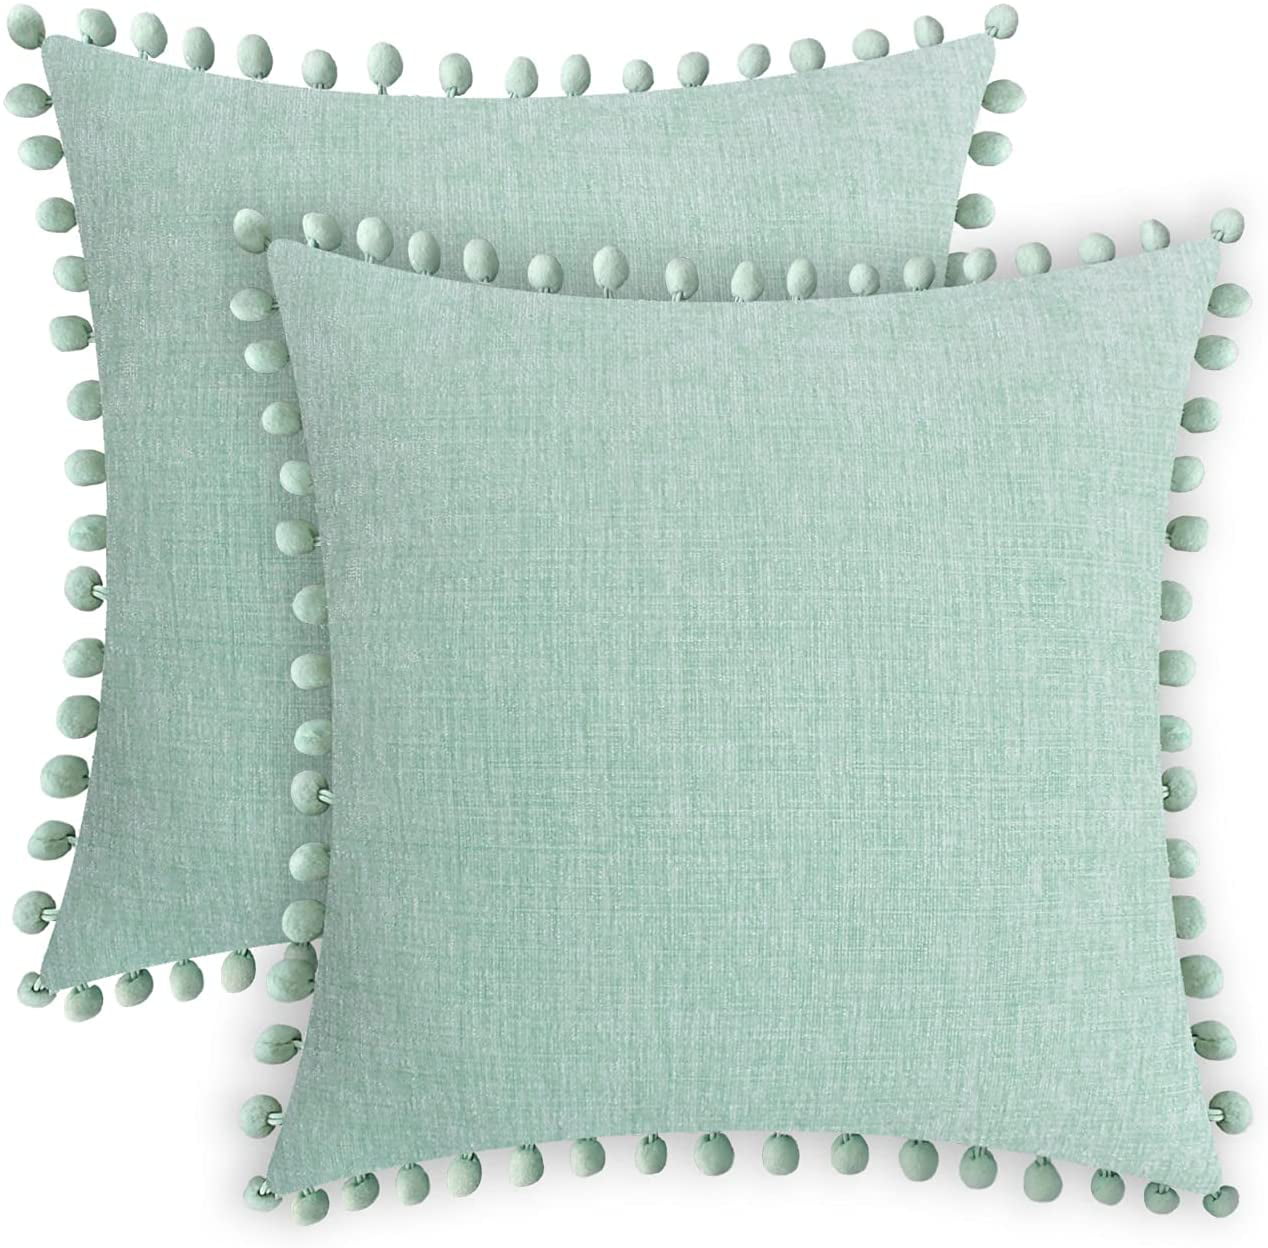 CaliTime Throw Pillow Cases Pack of 2 Cozy Solid Dyed Soft Chenille Cushion Covers with Pom Poms for Couch Sofa Home Decoration 20 X 20 Inches Teal